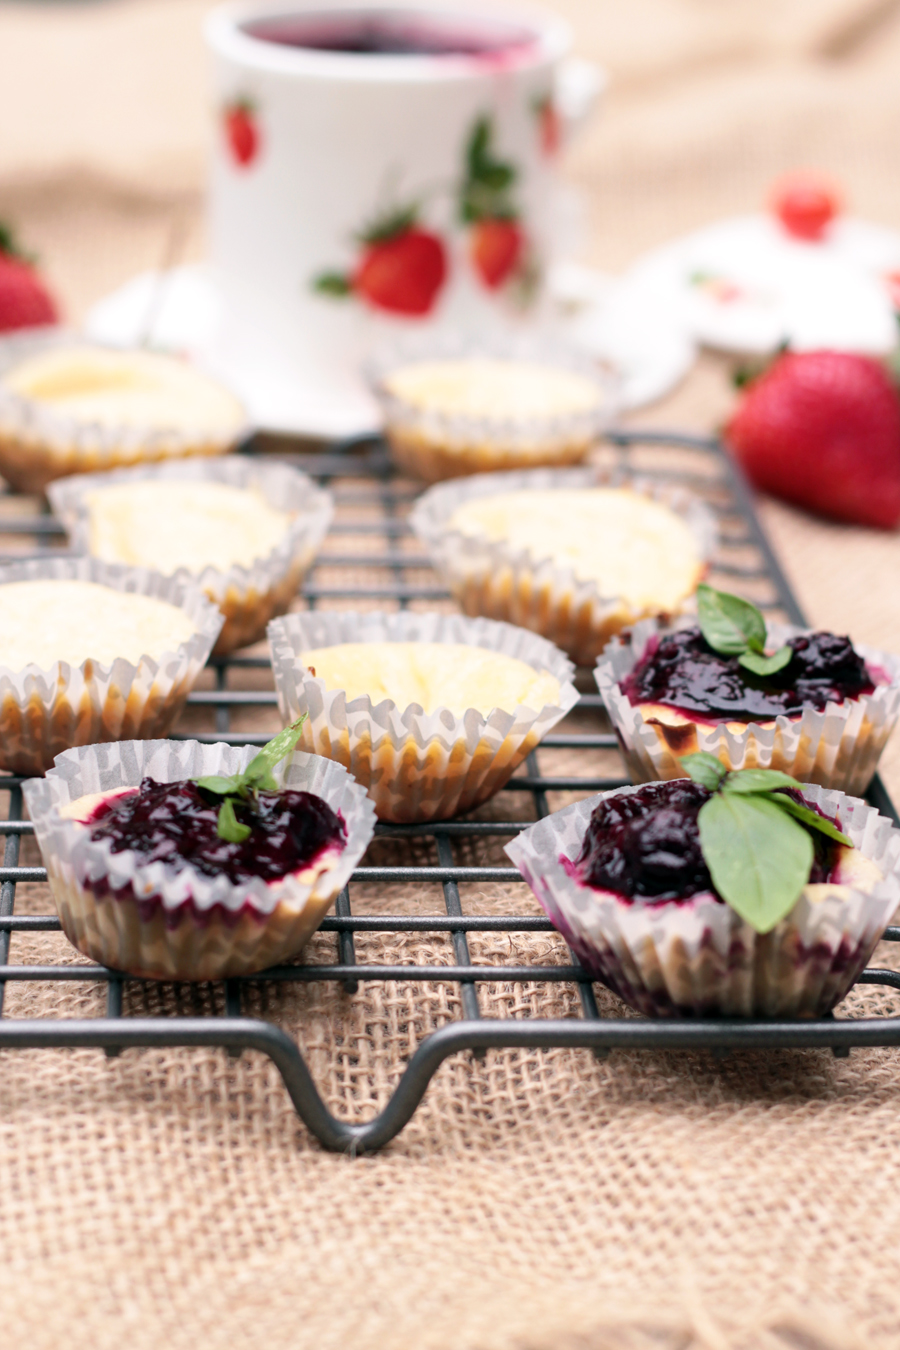 Cheesecake bites with berry coulis are mini desserts that satisfy a sweet tooth and fit into a healthy lifestyle.